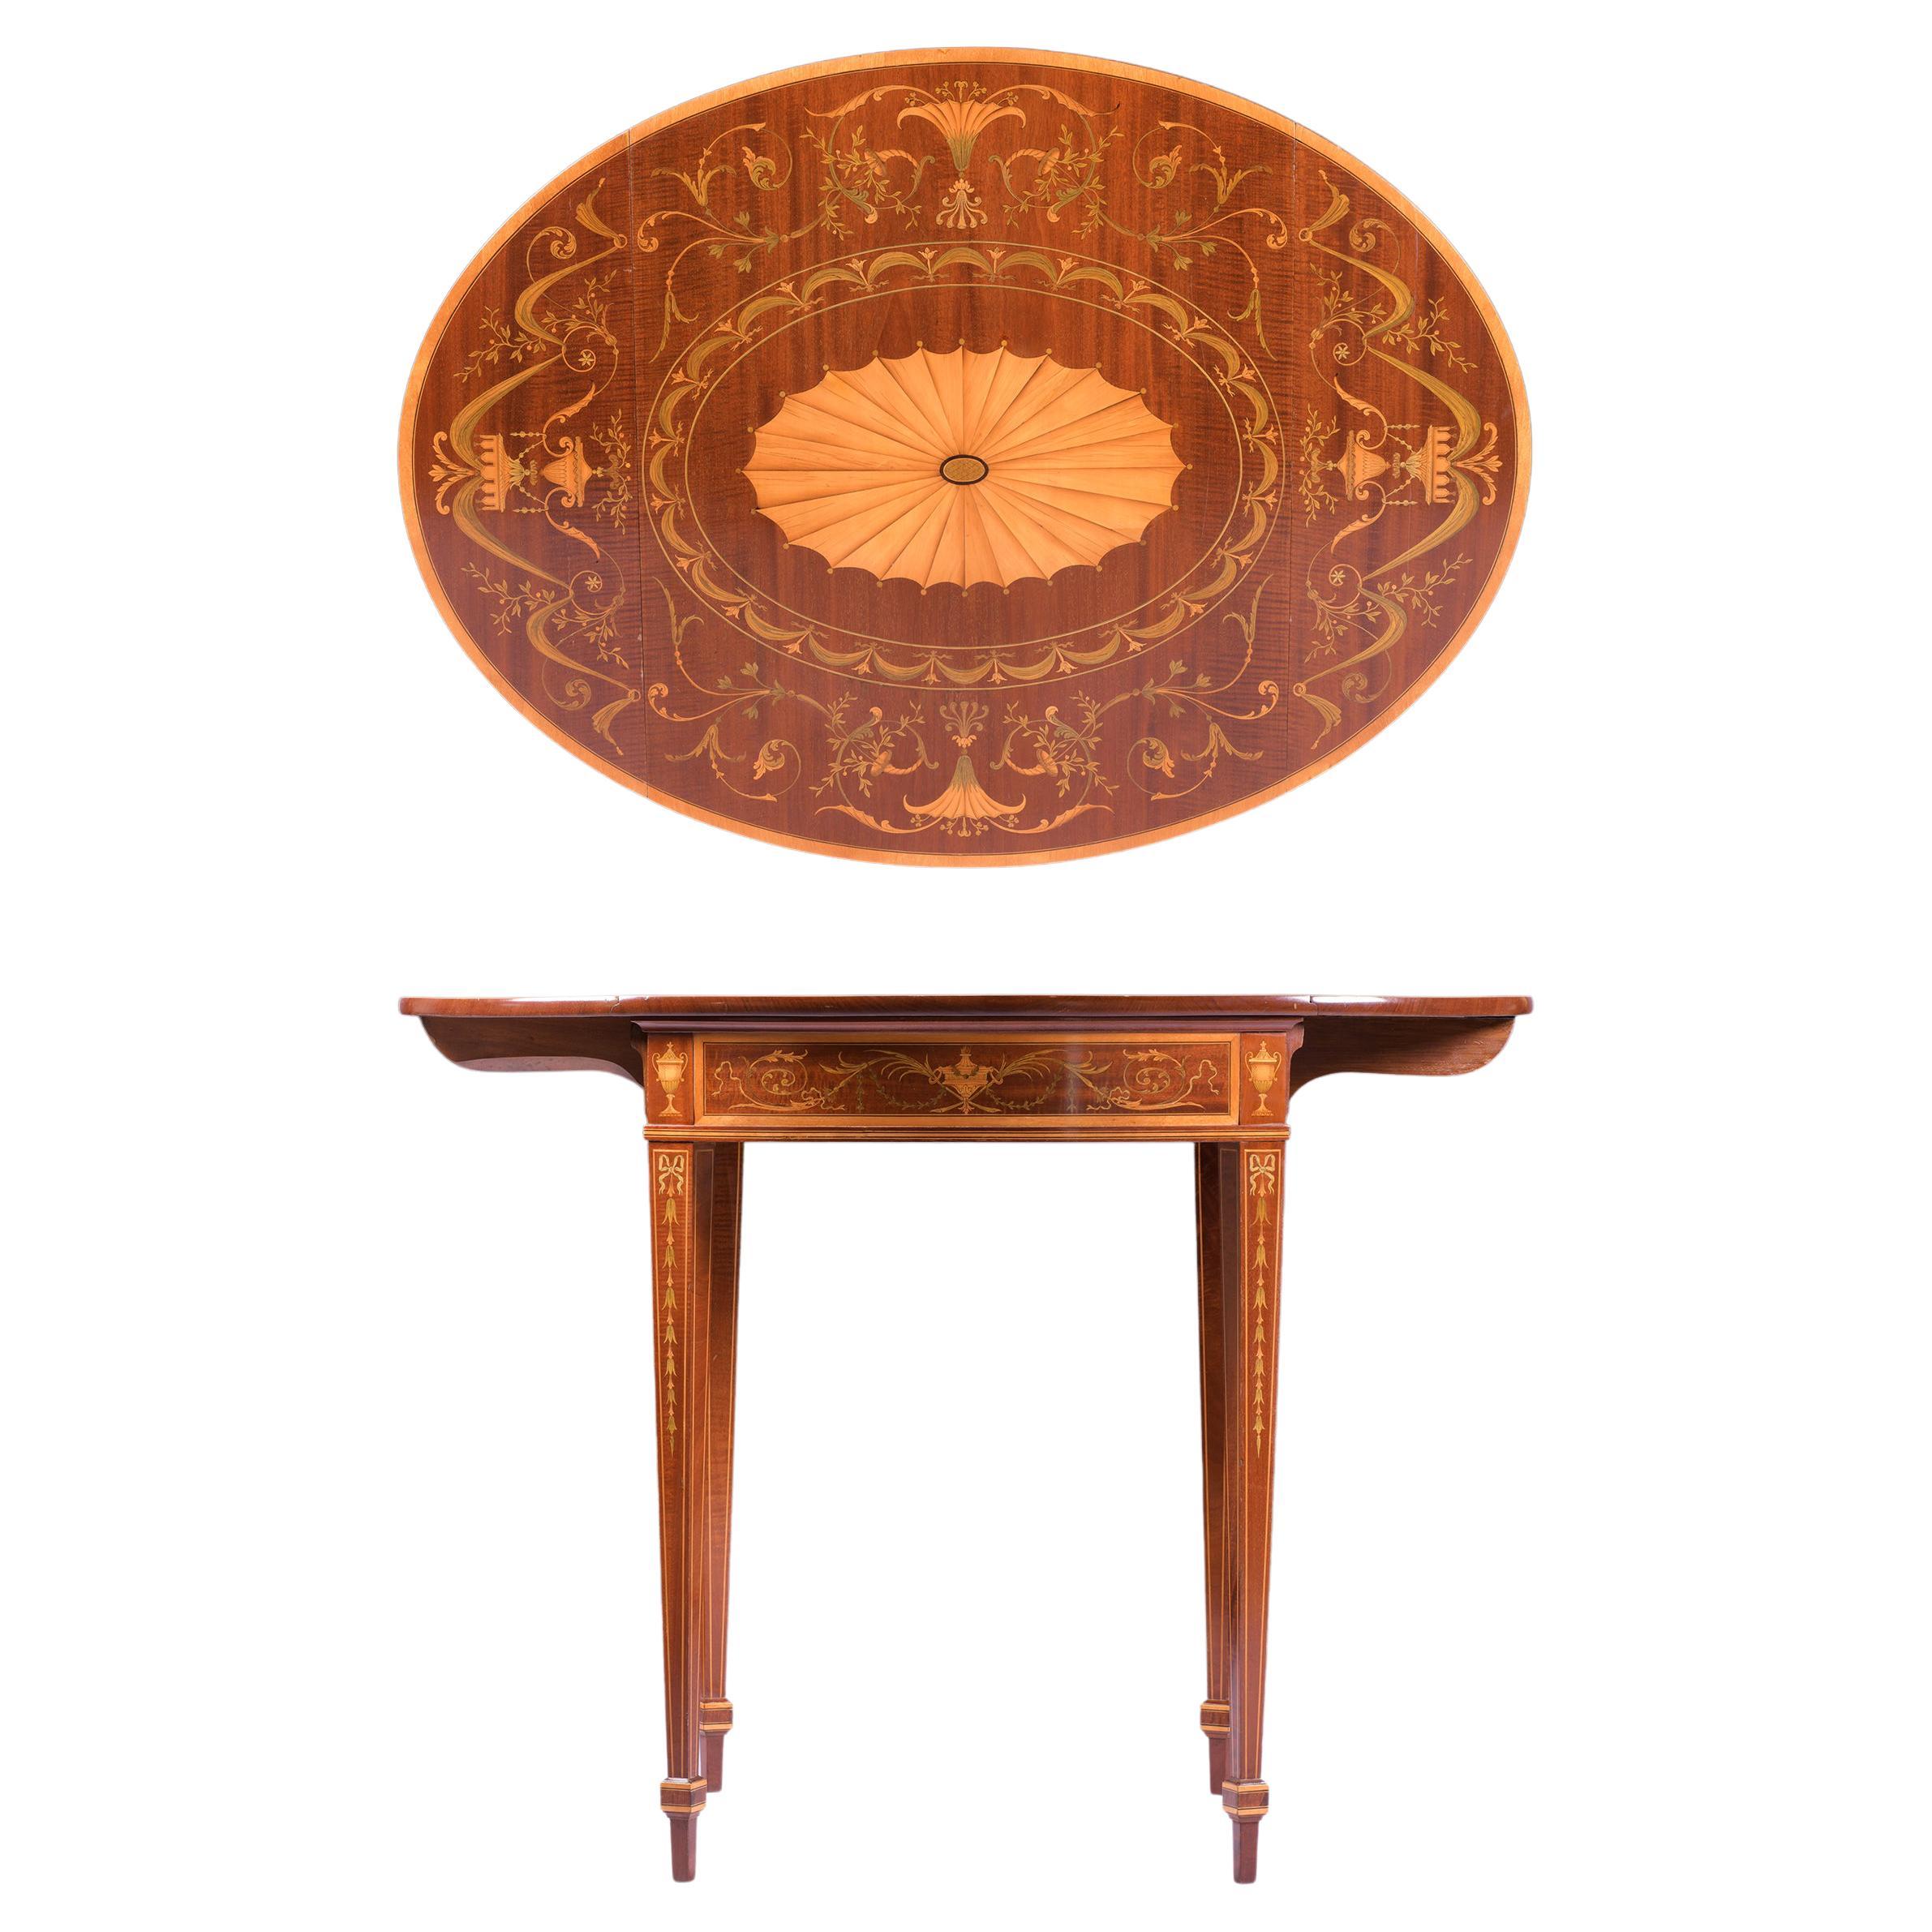 Late 19th Century English Edwardian Satinwood Pembroke Table By Edwards & Robert For Sale